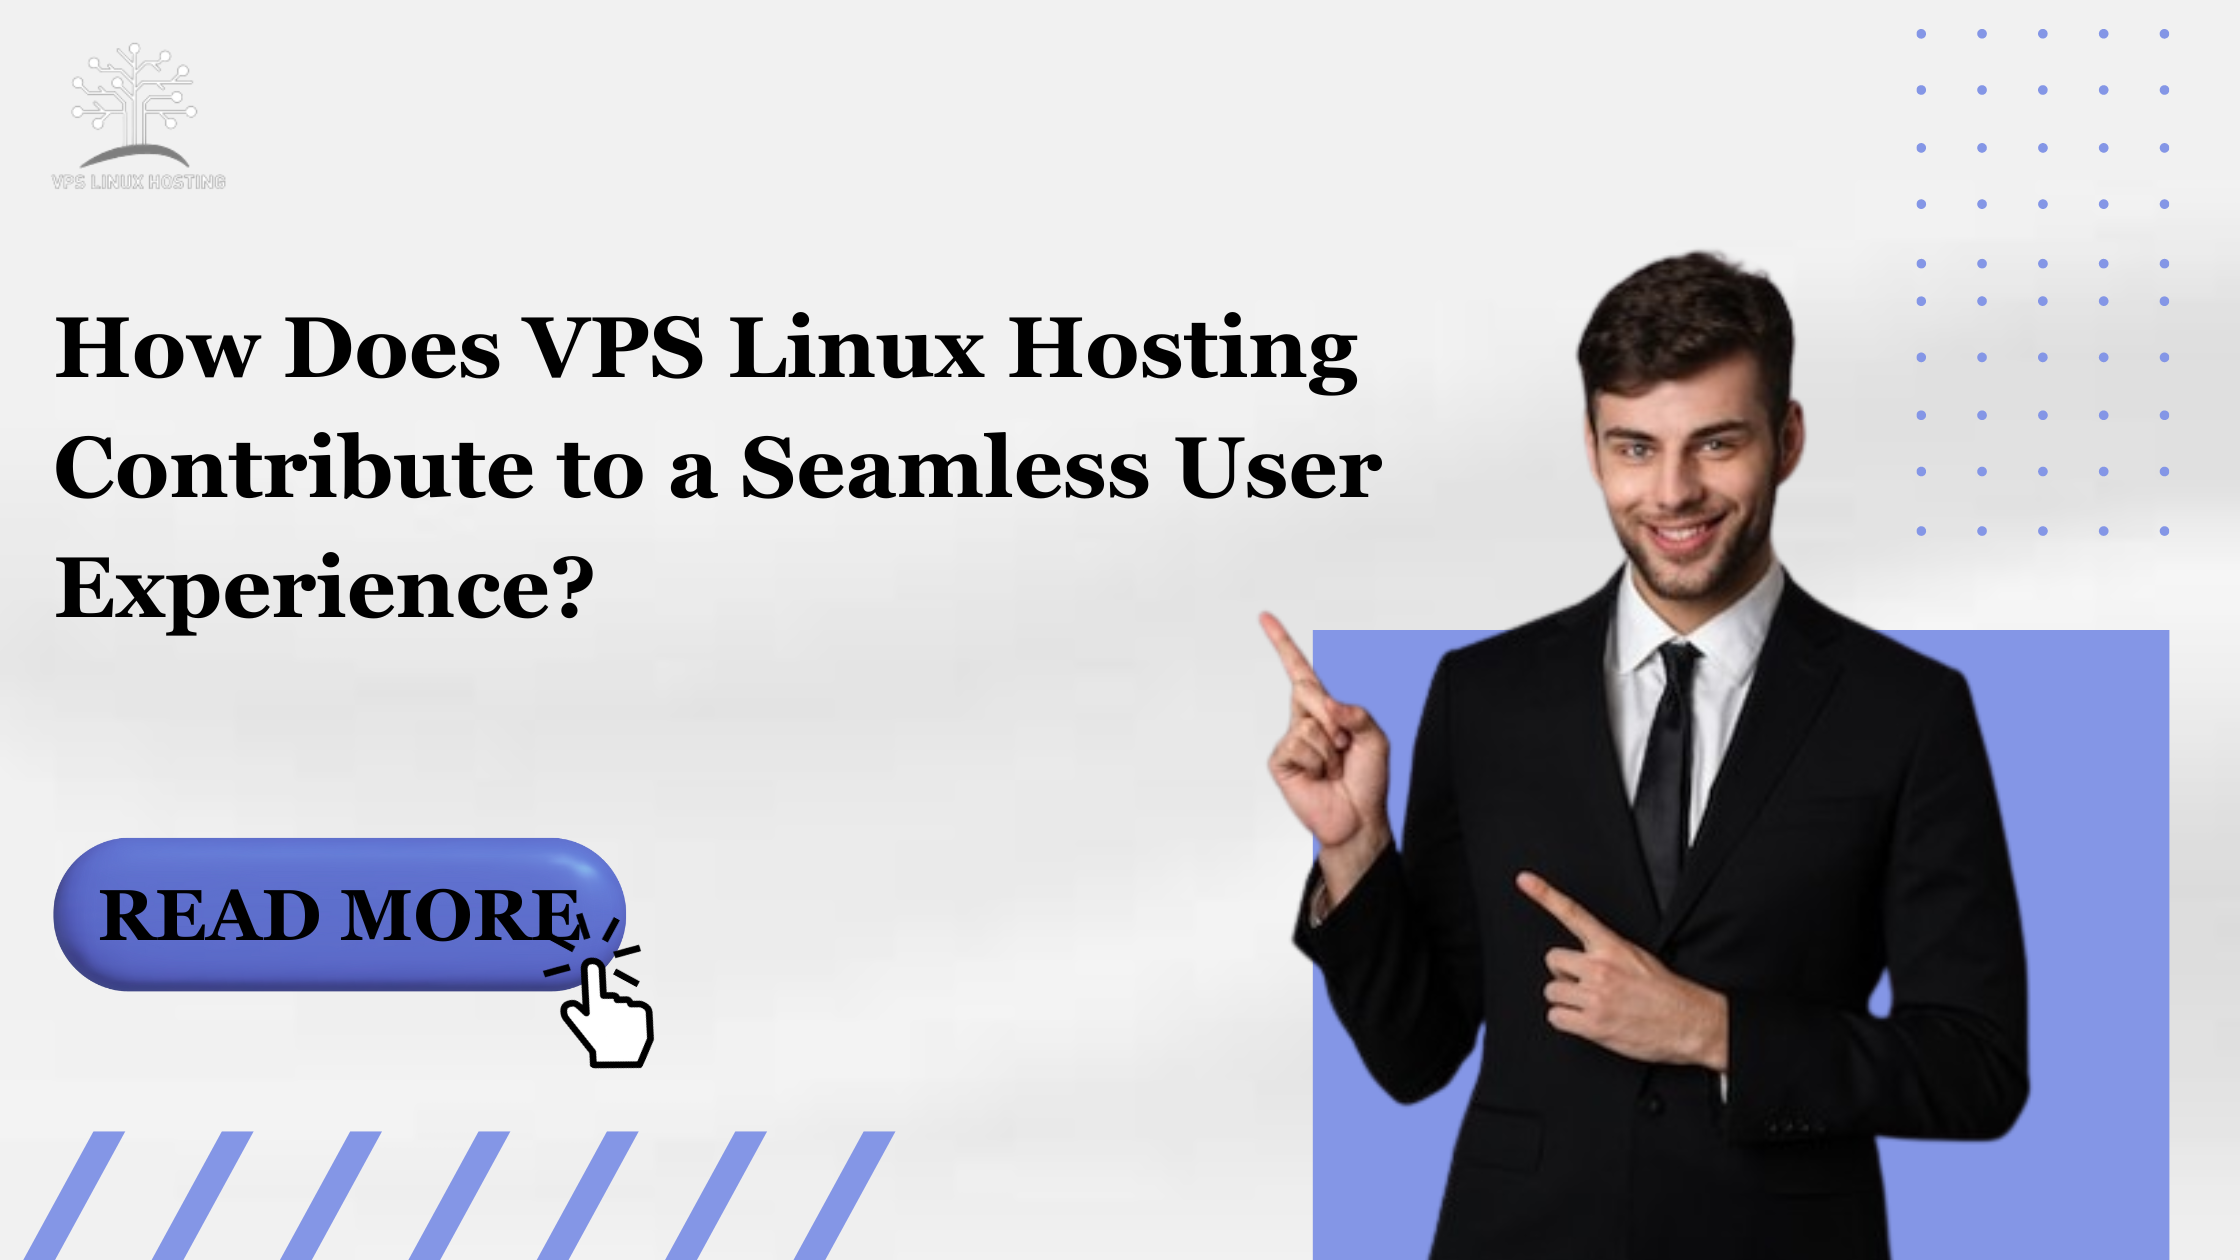 How Does VPS Linux Hosting Contribute to a Seamless User Experience?